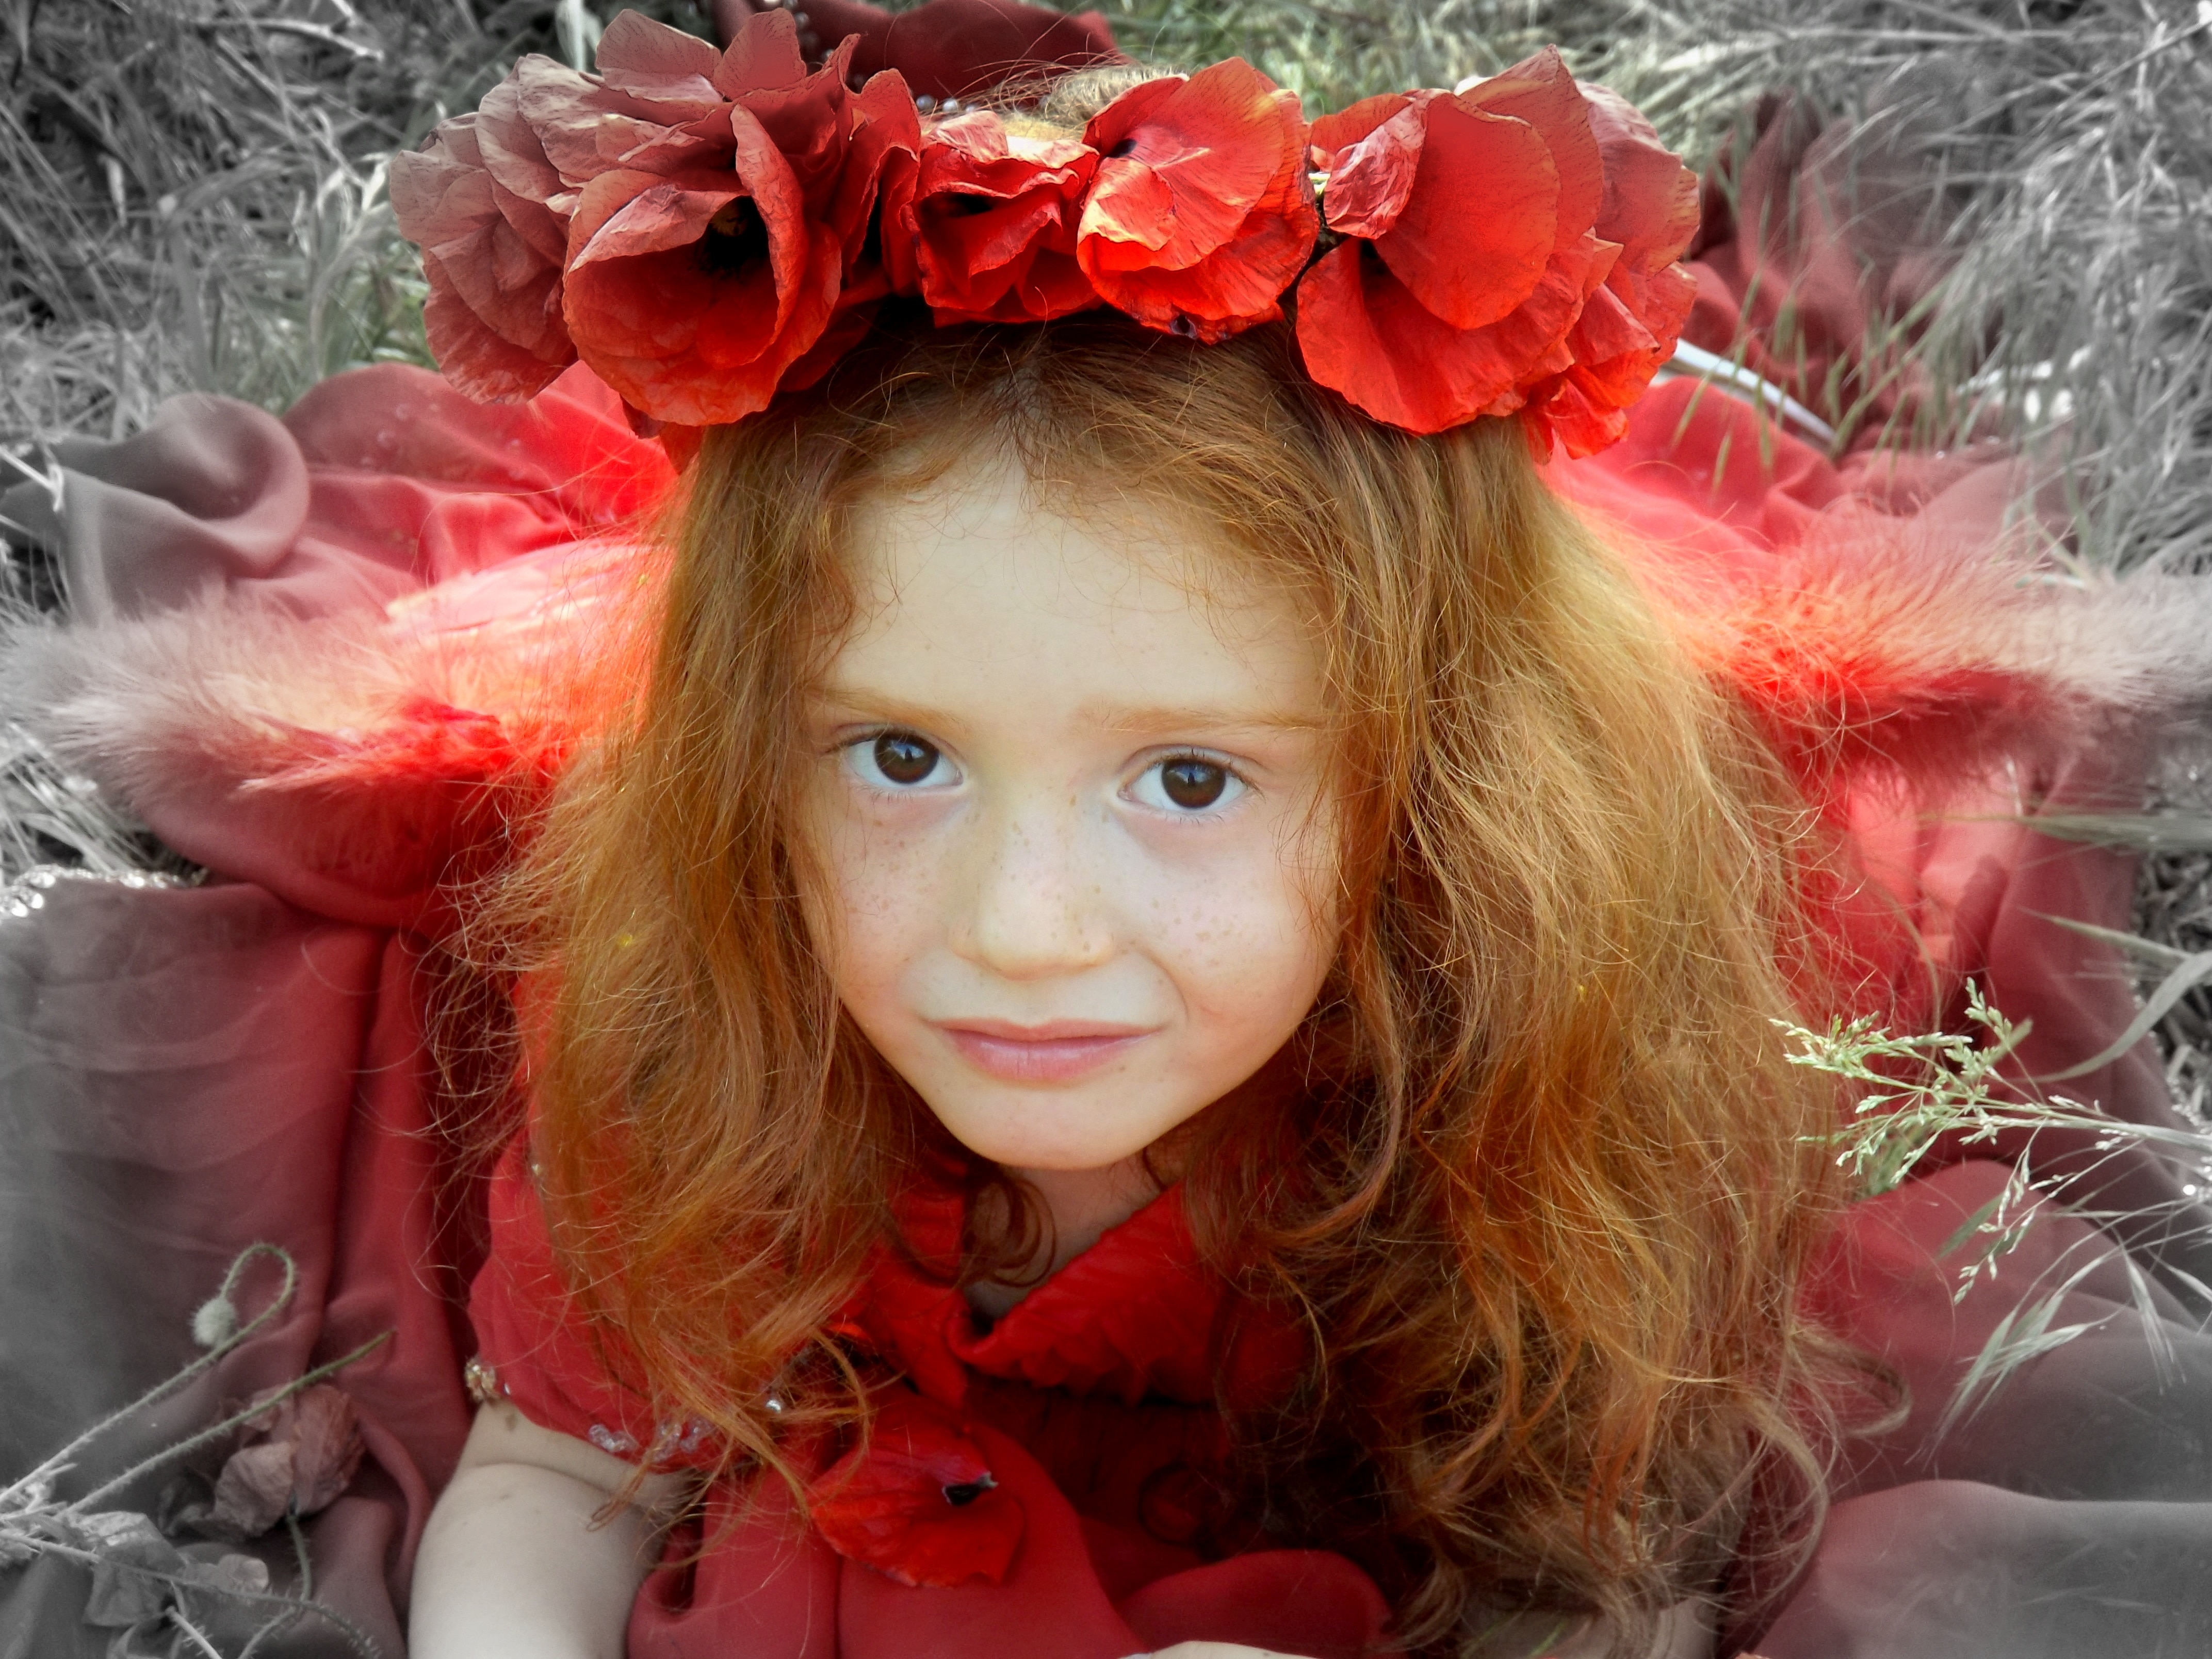 Girl, Red, Poppies, Red Hair, Camp, child, one girl only